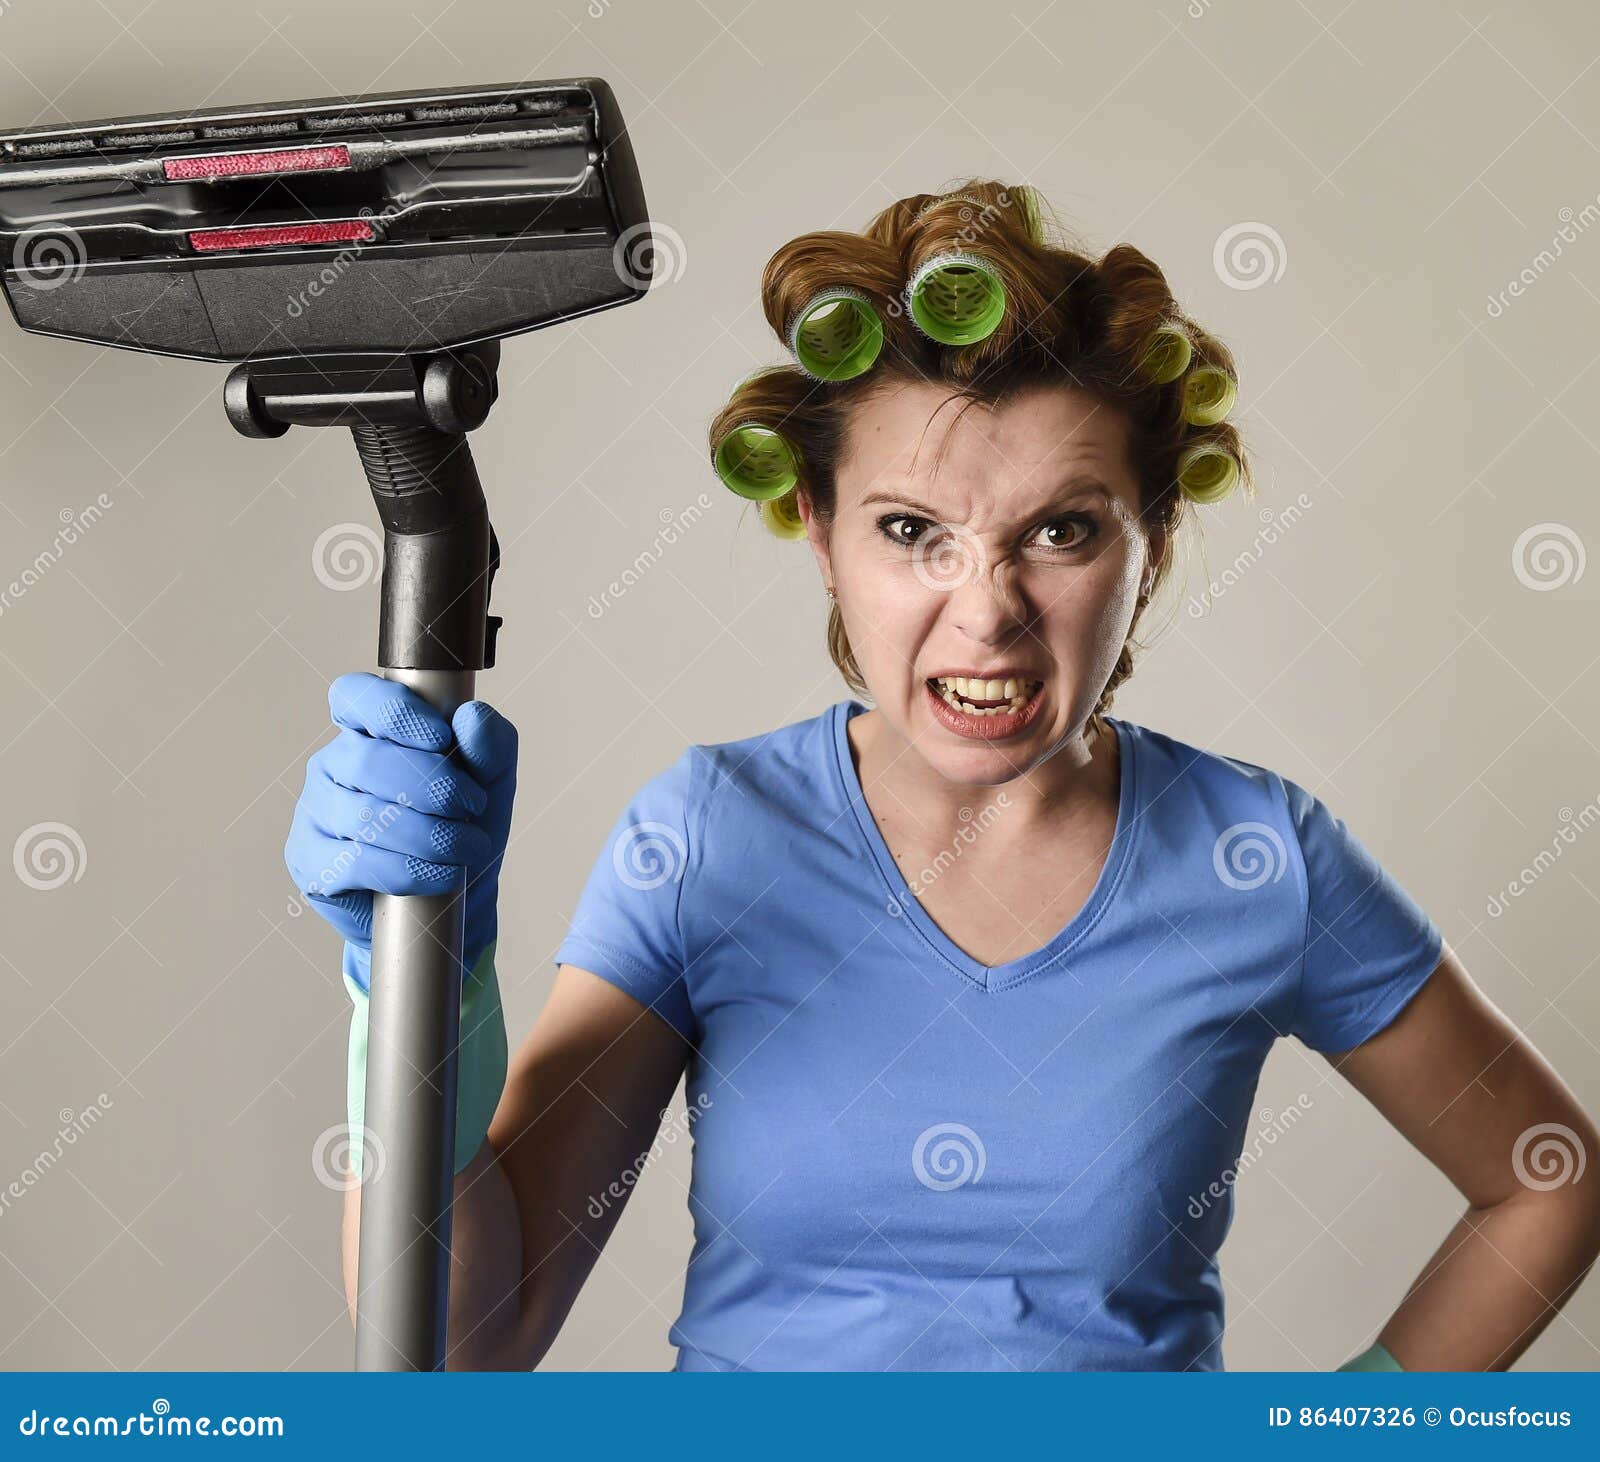 maid service woman or upset housewife in hair rollers cleaning g